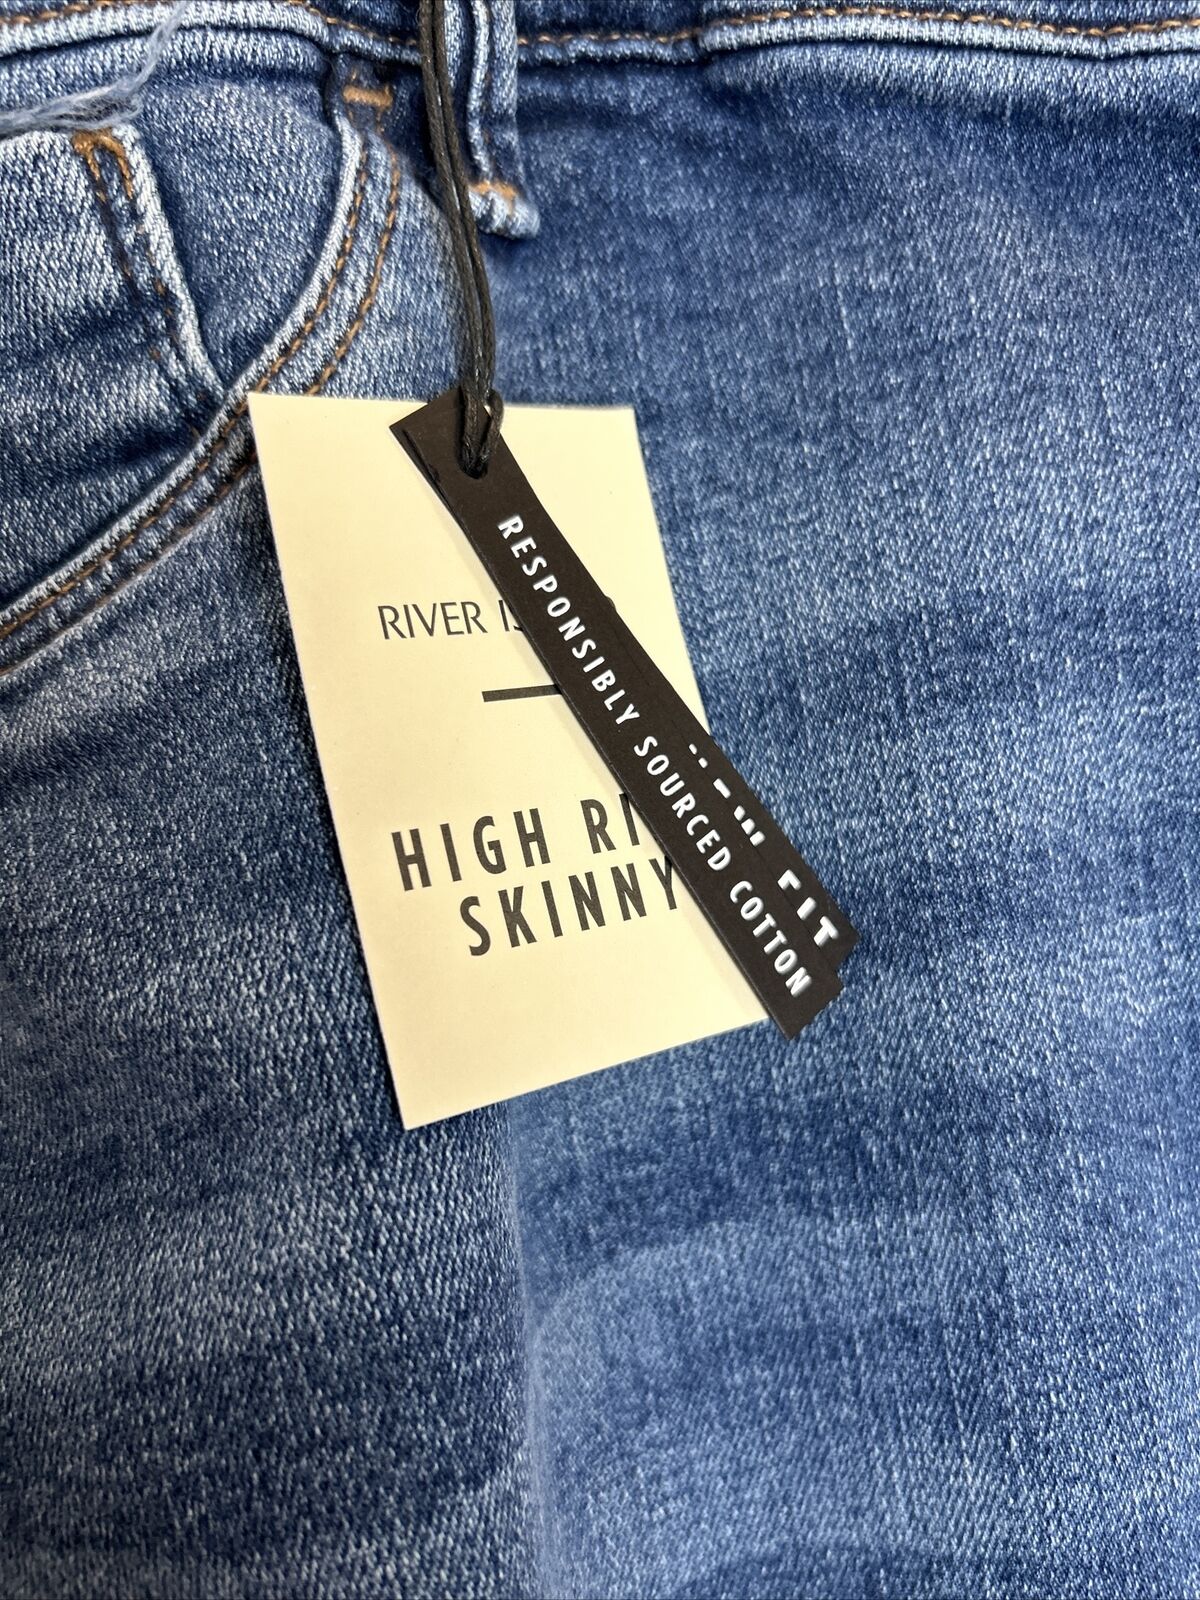 River Island High Rise Skinny Womens Jeans. Size 28.